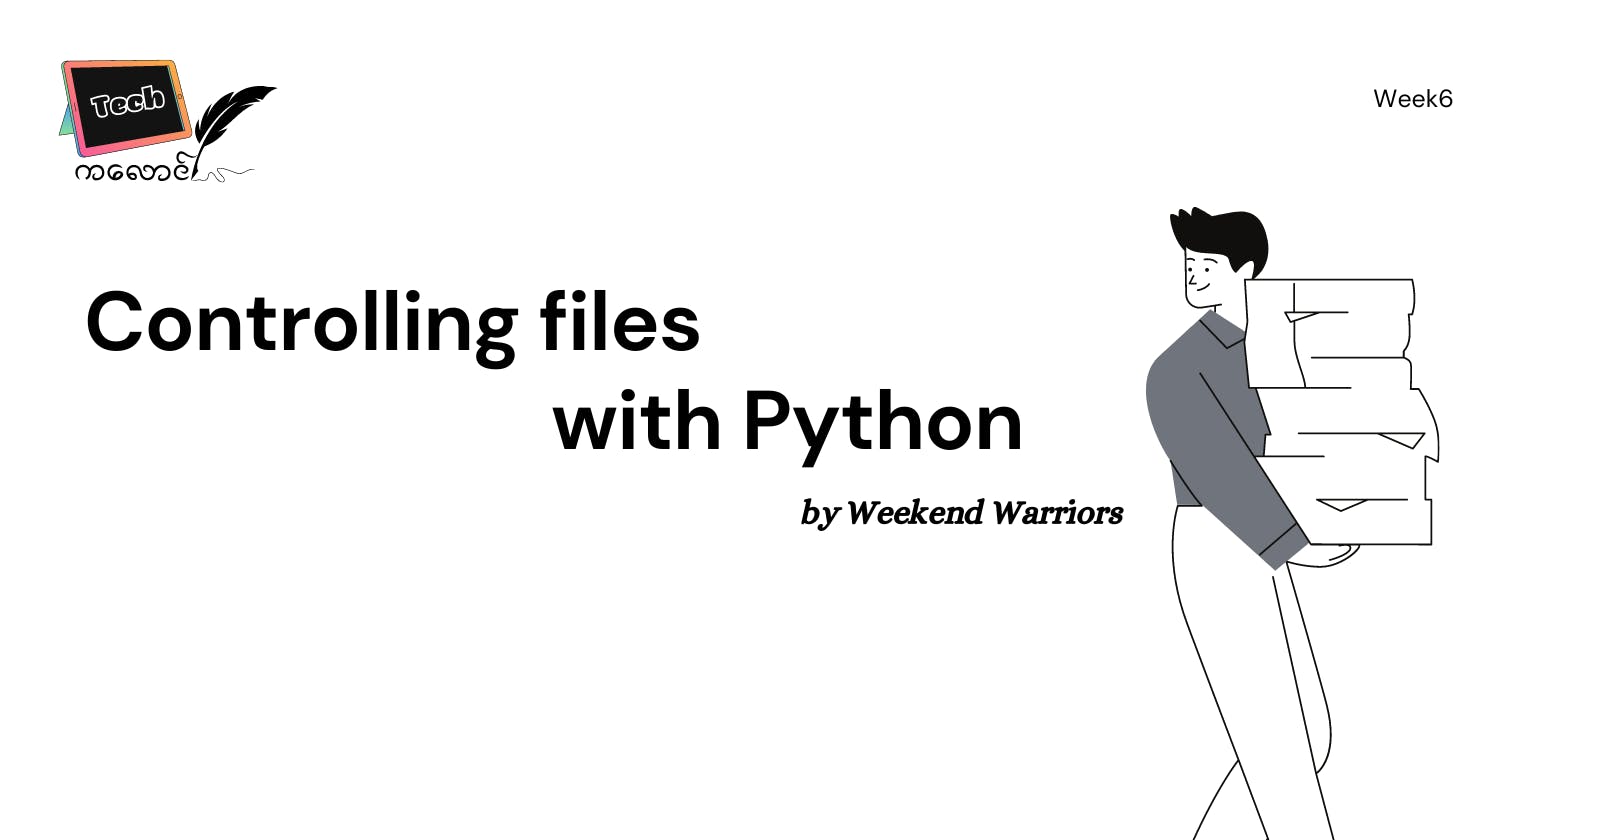 Controlling files with Python